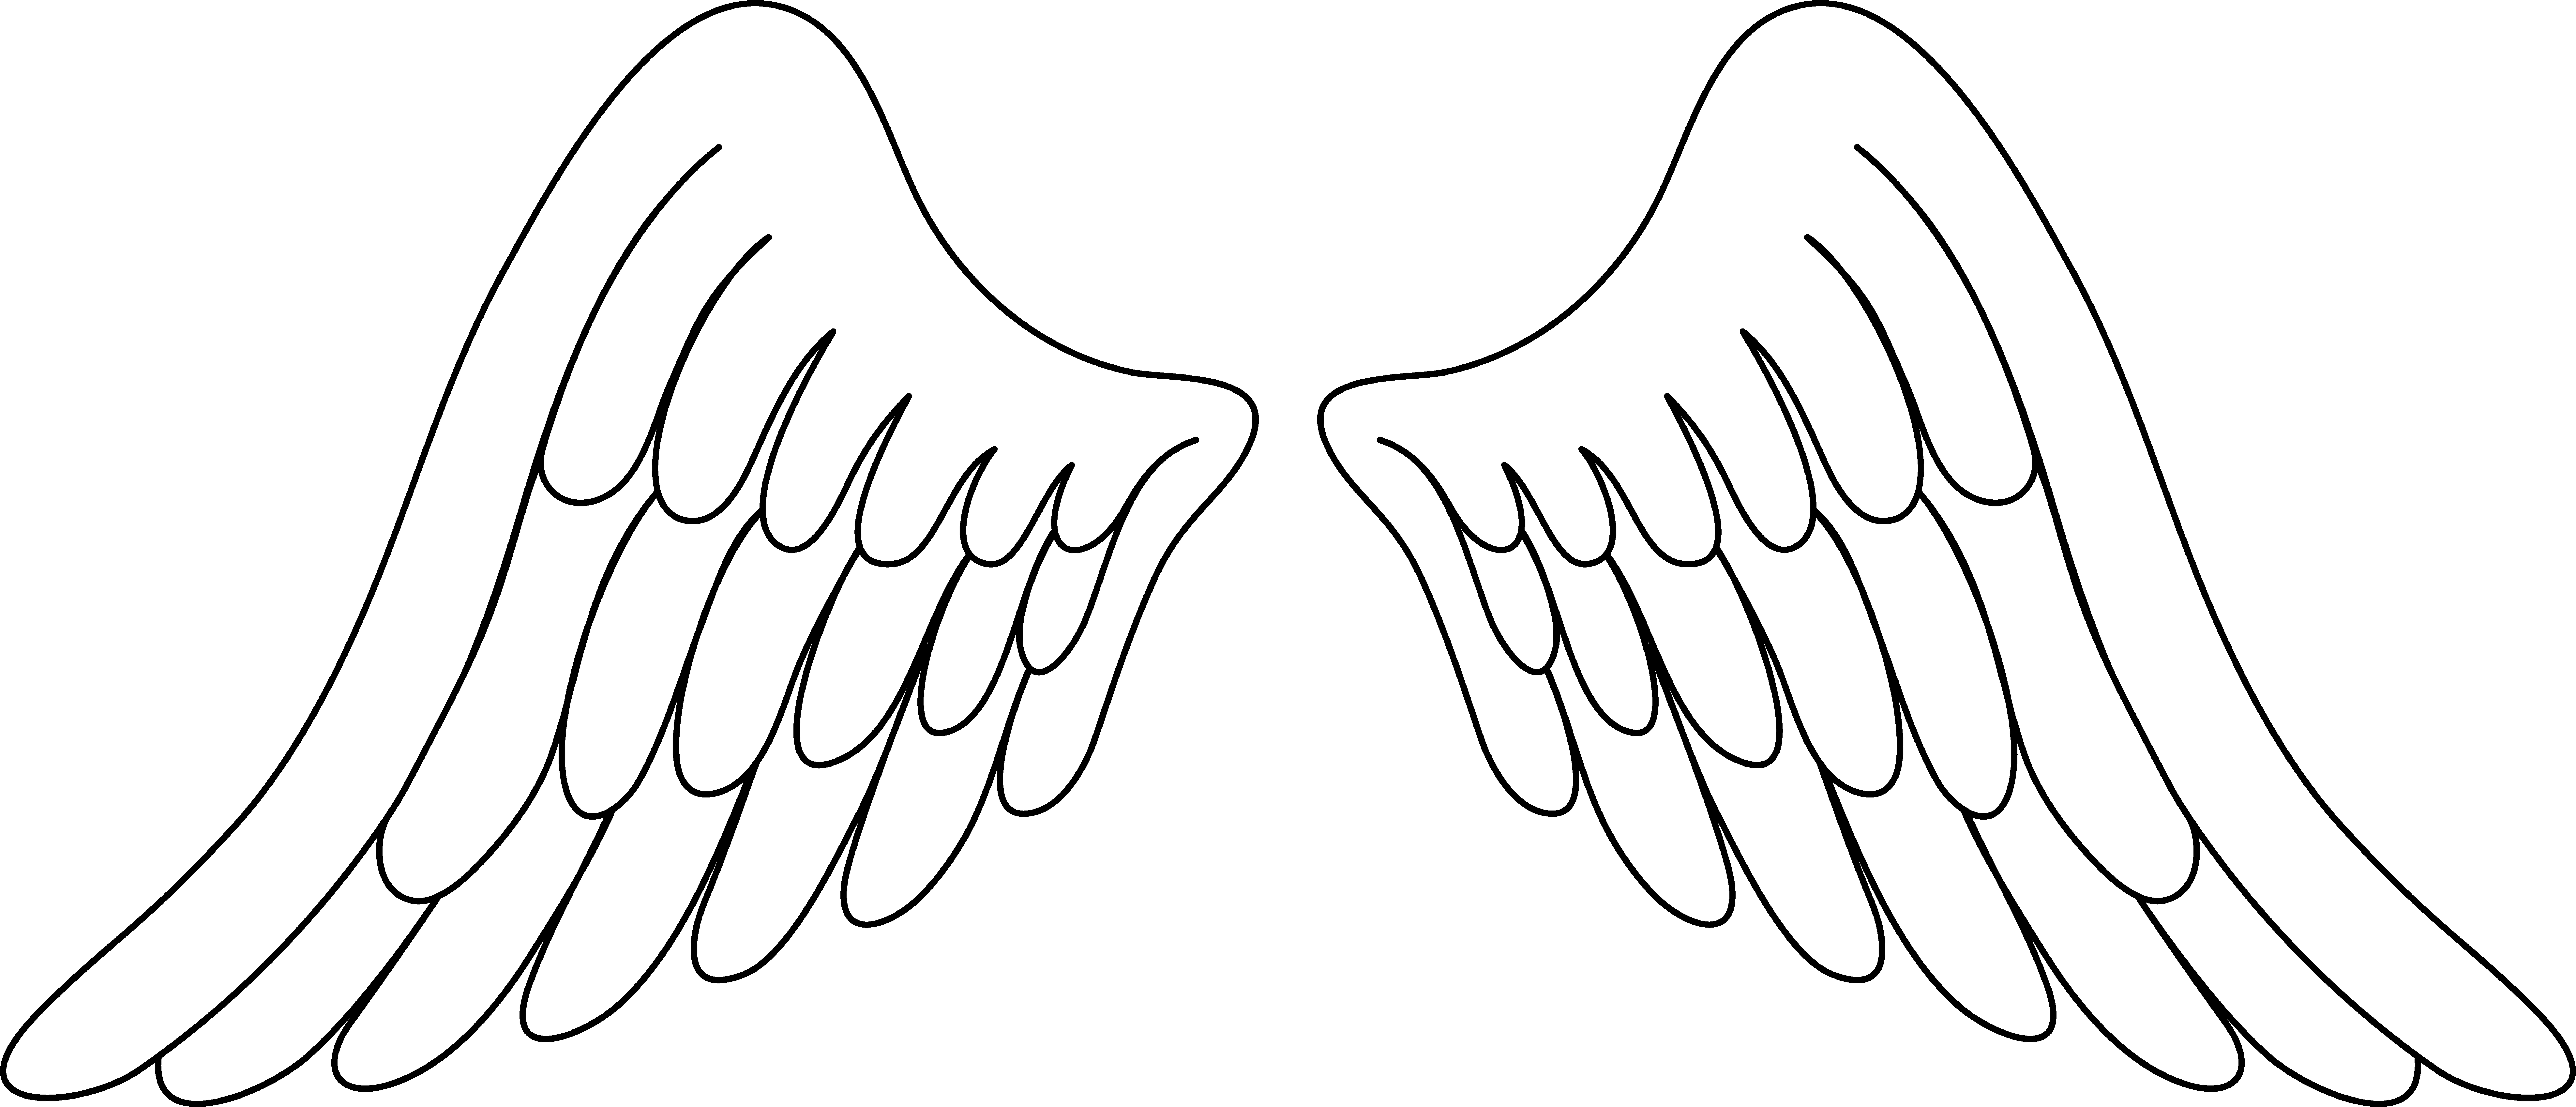 Angel wings wing clip. Hospital clipart outline